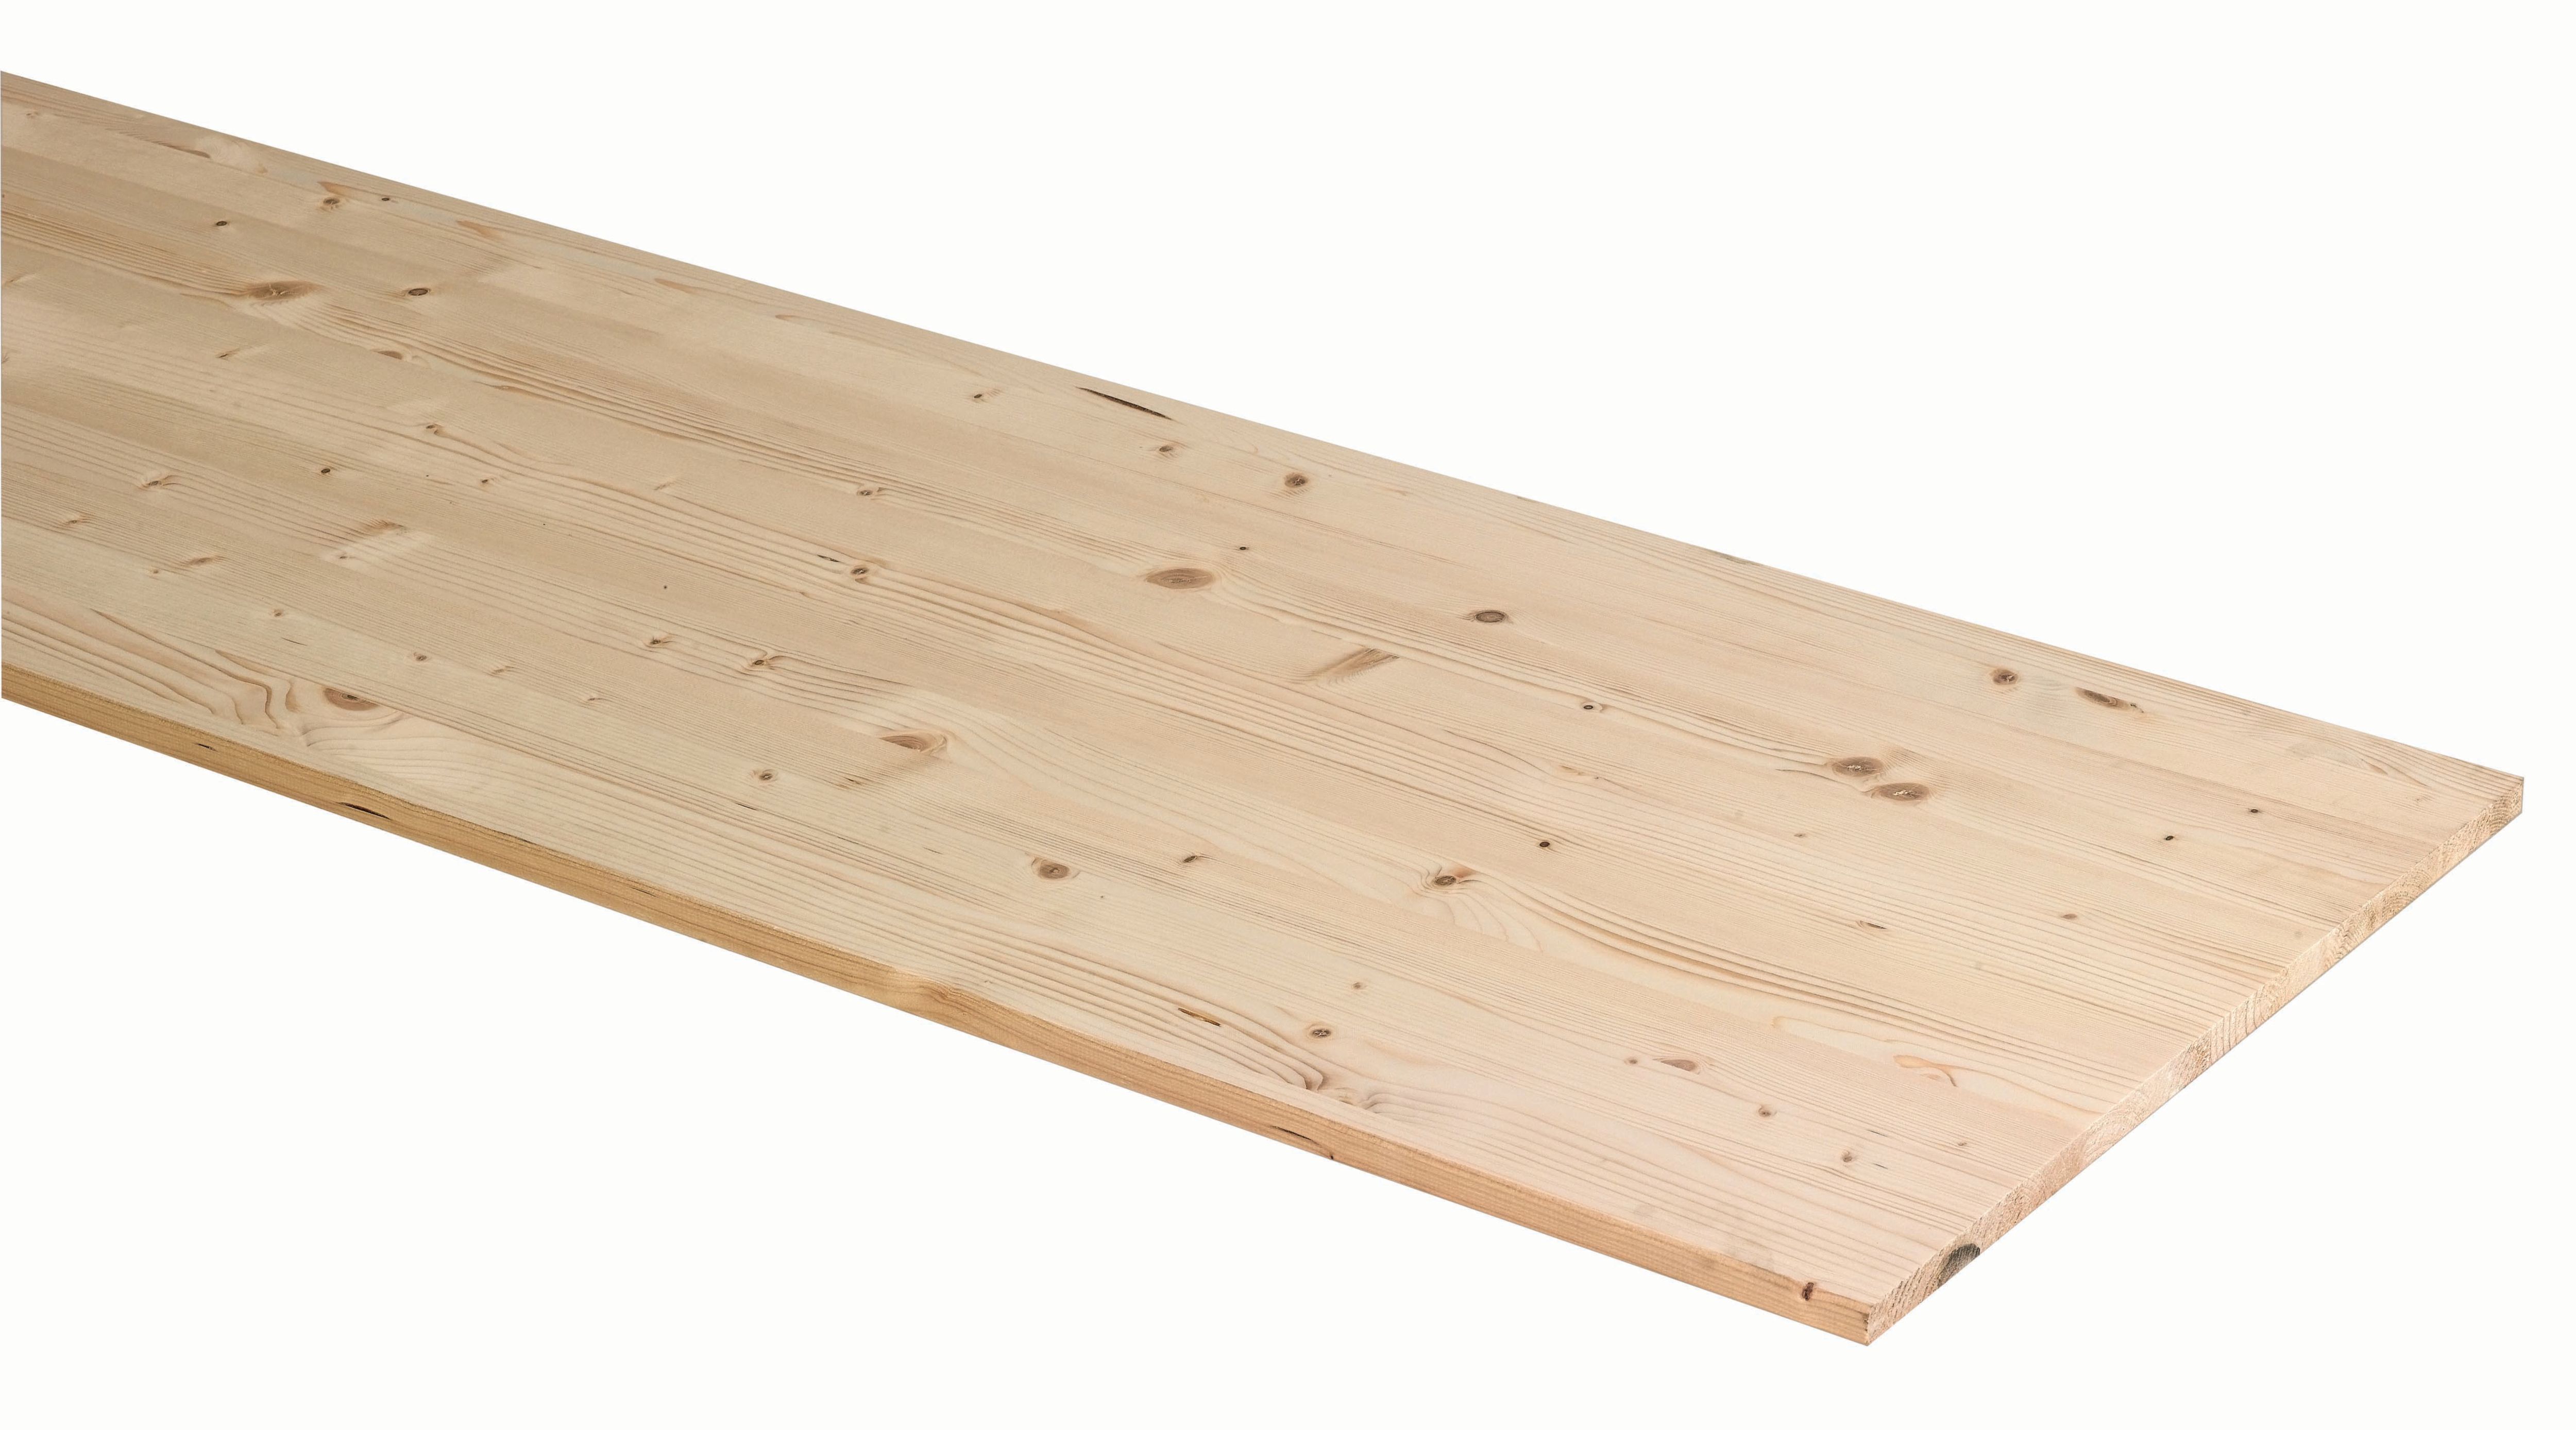 Image of Wickes General Purpose Spruce Timberboard - 28mm x 600mm x 2050mm